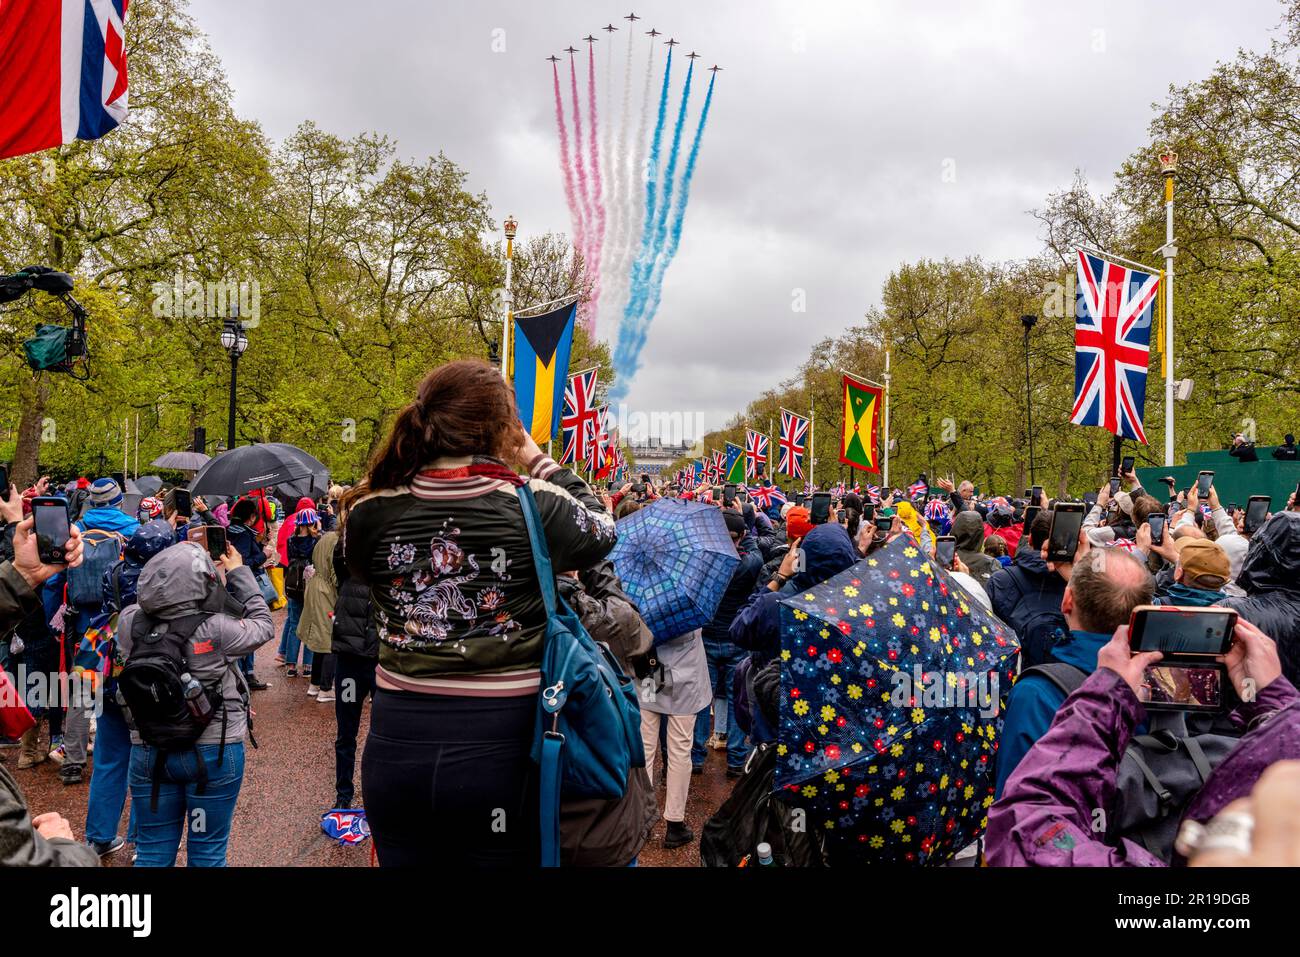 People Standing In The Mall Taking Photos Of The Red Arrows Fly Past After The Coronation of King Charles III, London, UK. Stock Photo